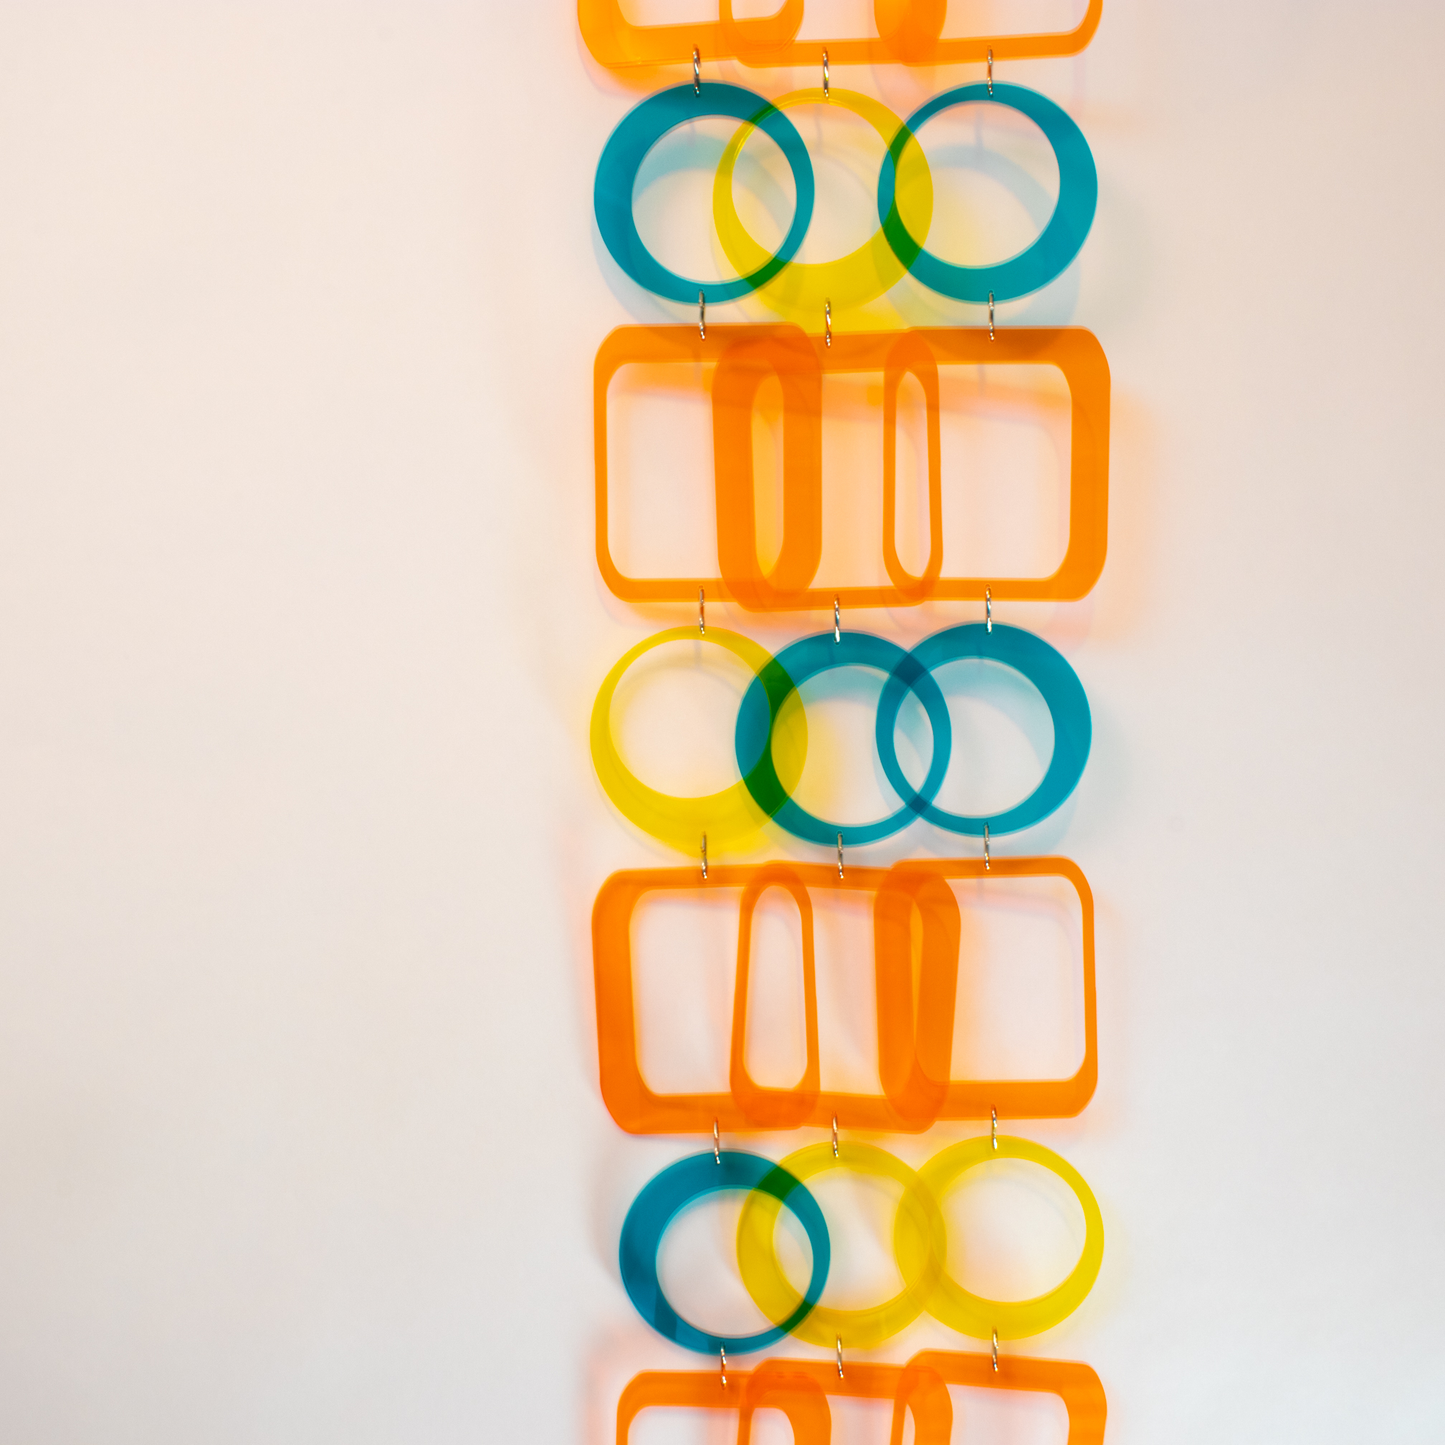 Beautiful DIY Kit to make mobile, room divider, window treatment, or wall art in clear orange, teal, yellow by AtomicMobiles.com 